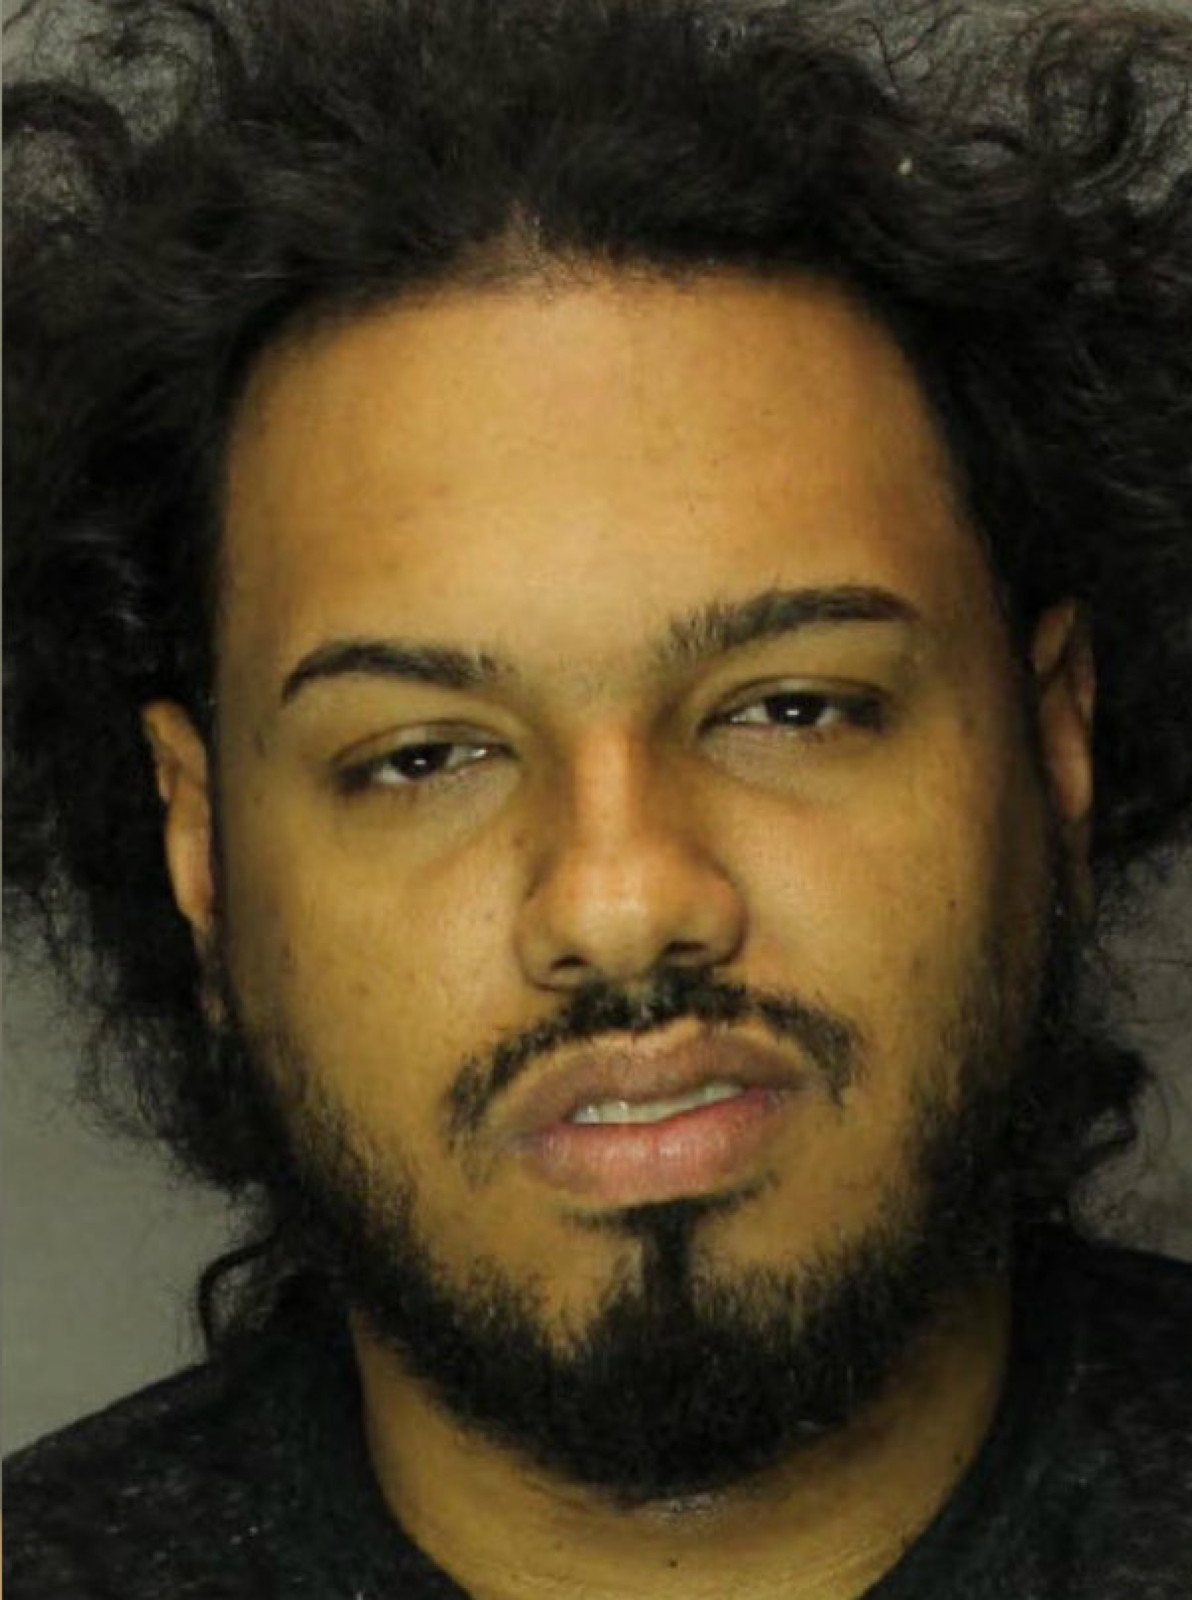 East Providence Police were involved in the investigation and arrest of alleged heroin dealer Michael "Montana Millz" Persaud.